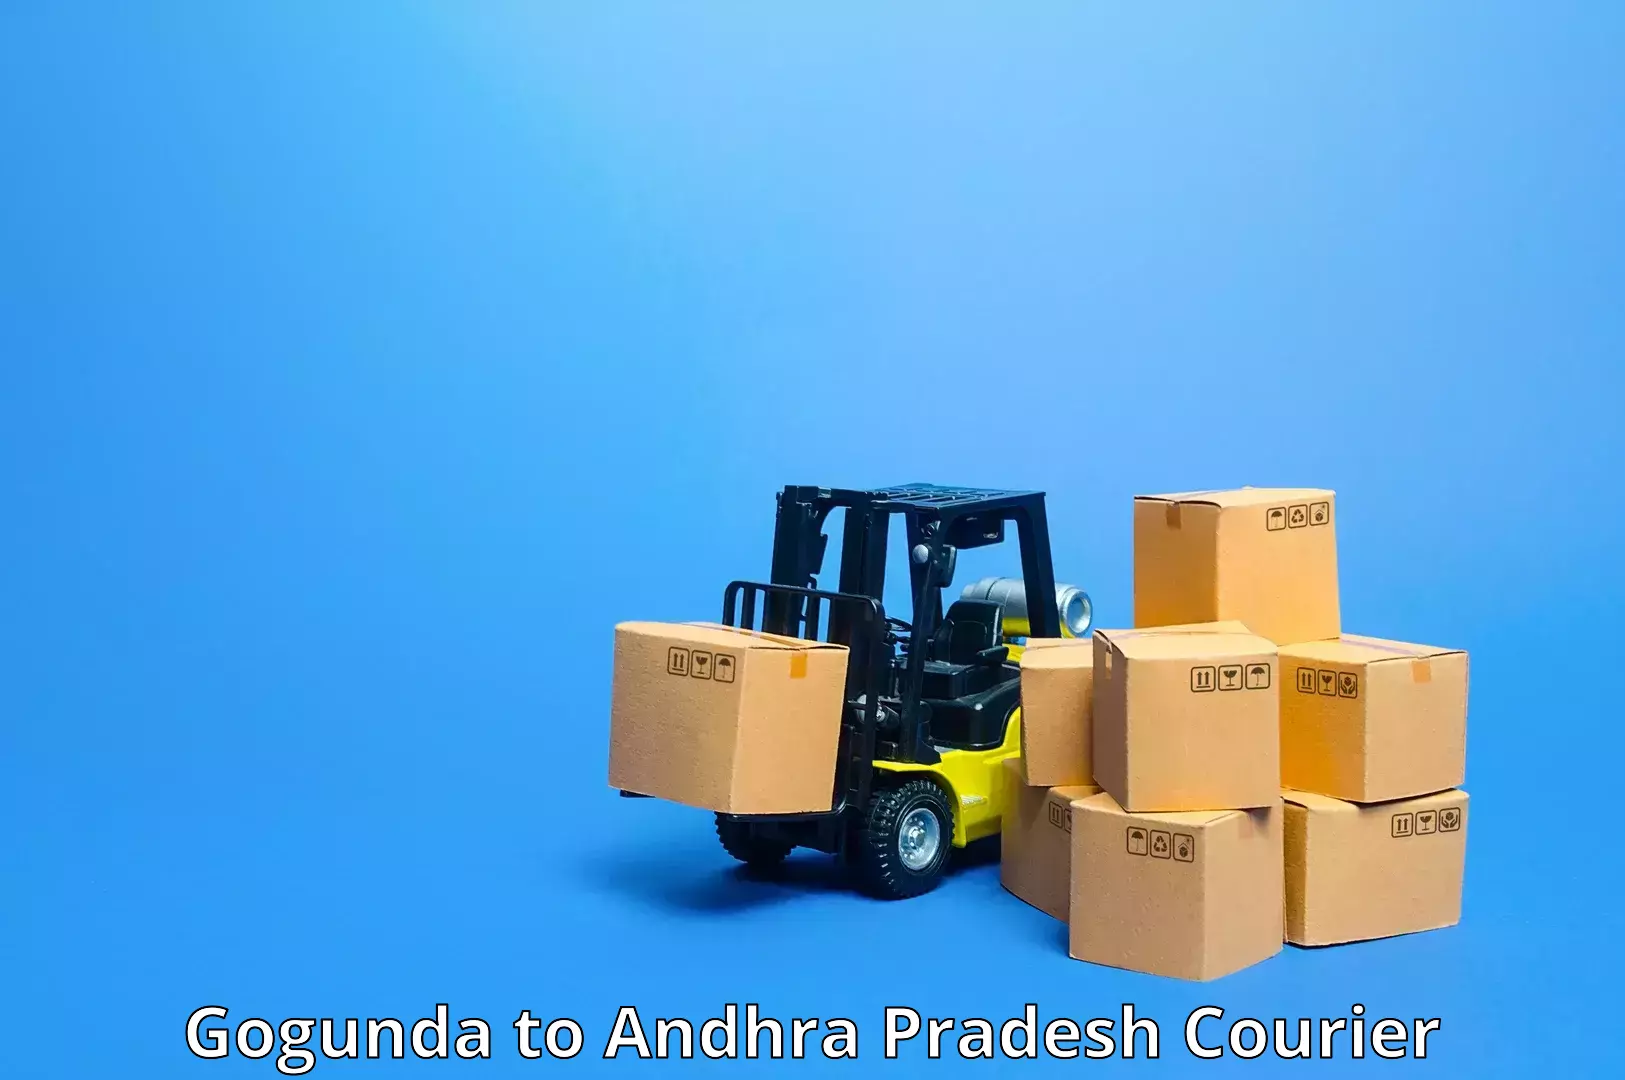 Global delivery options Gogunda to Sattenapalle